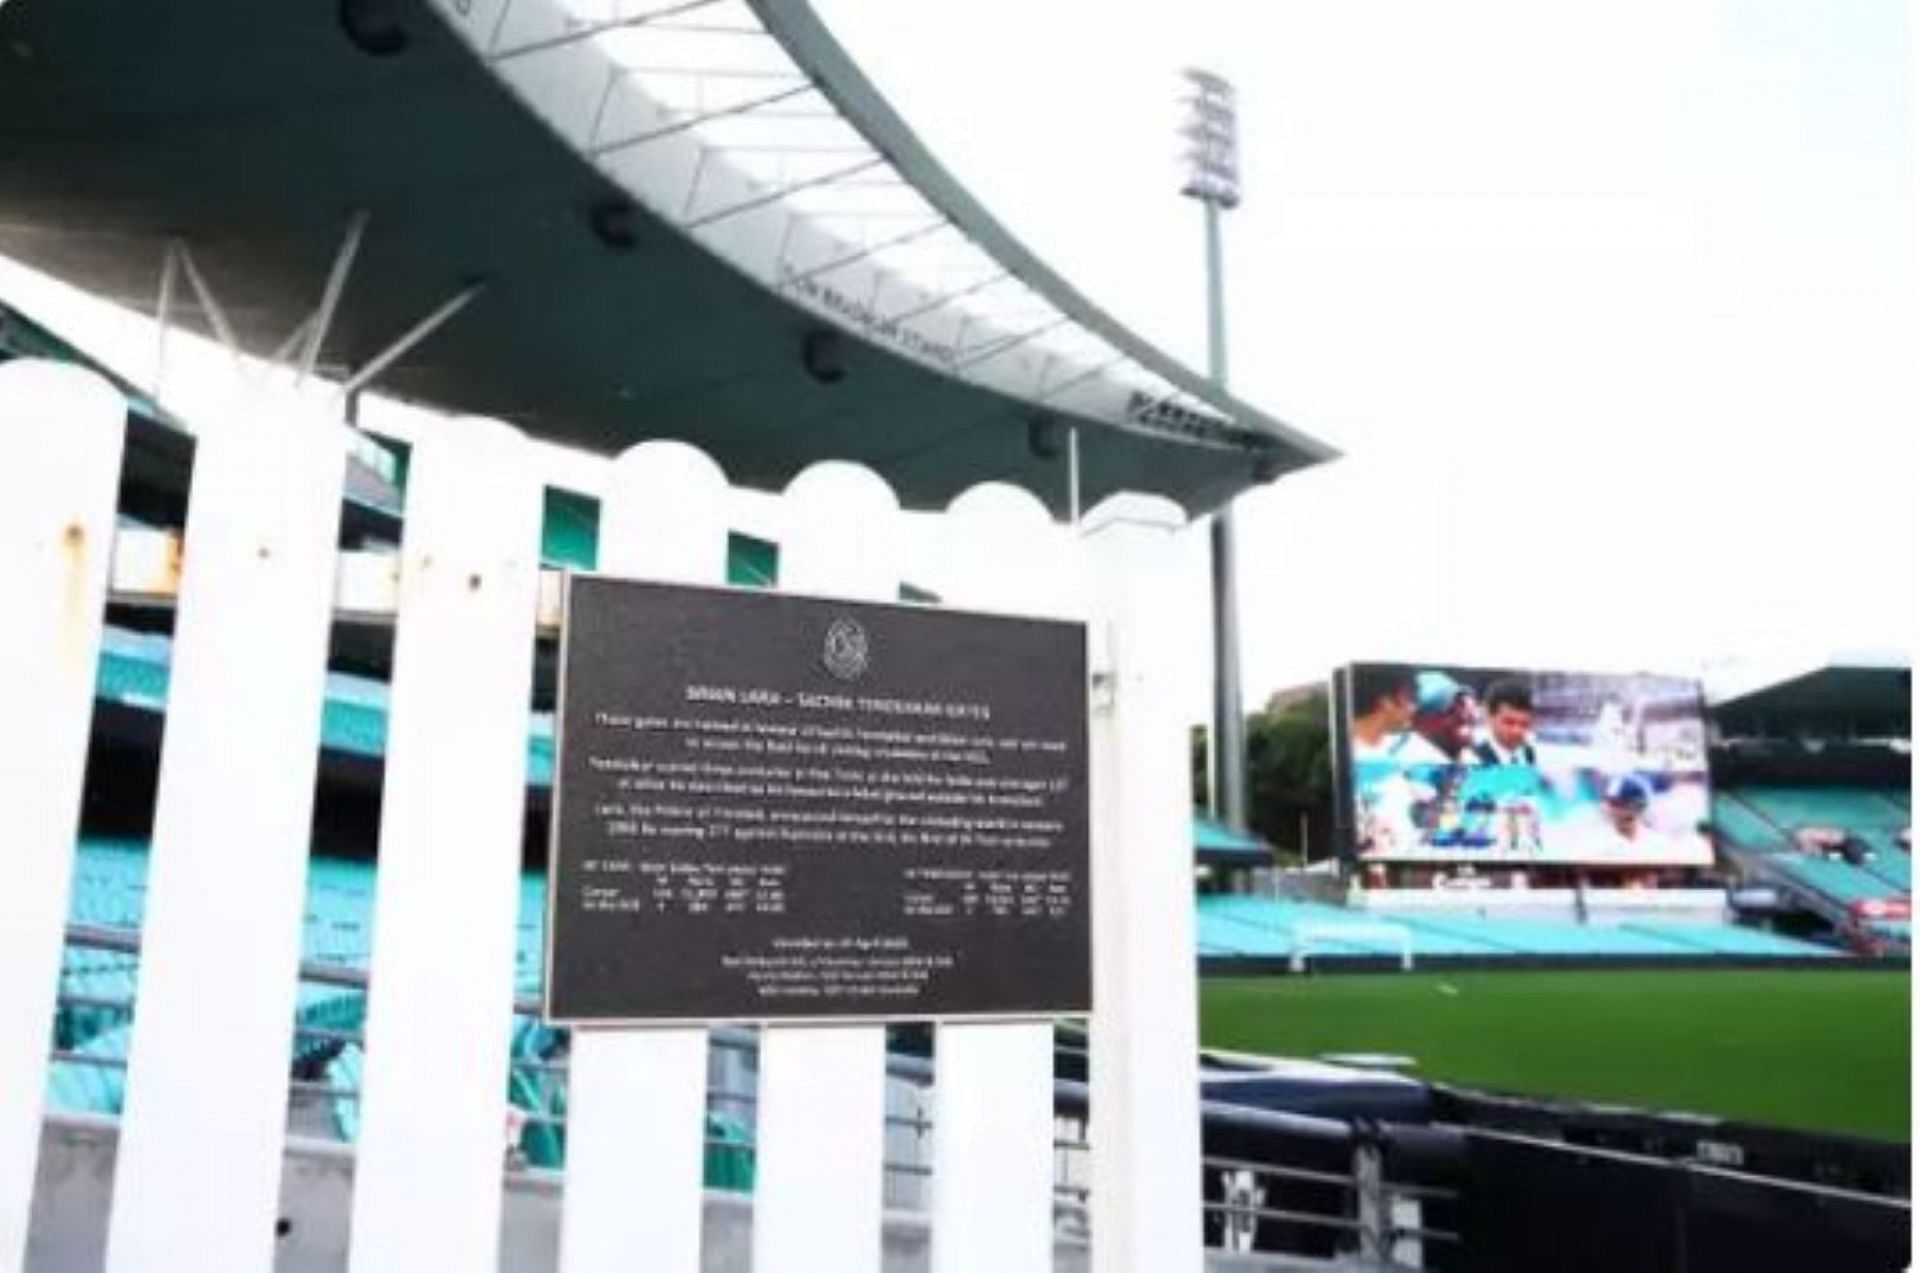 Sachin Tendulkar and Brian Lara have had some of their best performances at the SCG